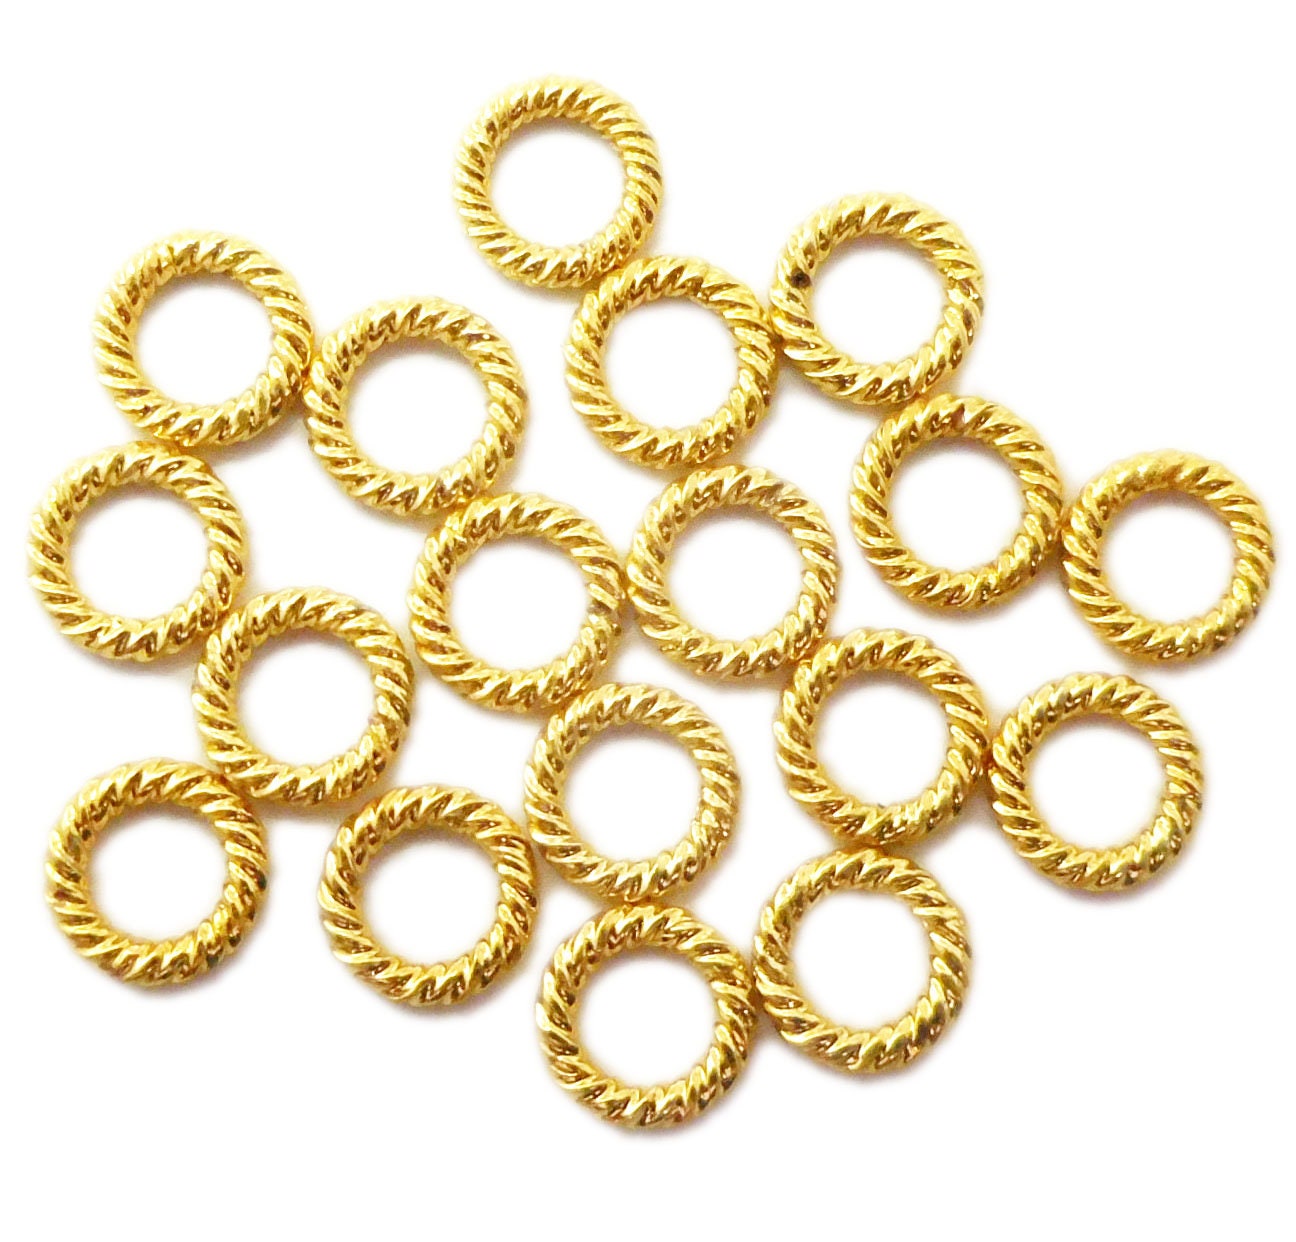 40 Pieces 12mm Soldered Closed Jump Rings Twisted Ring Sterling